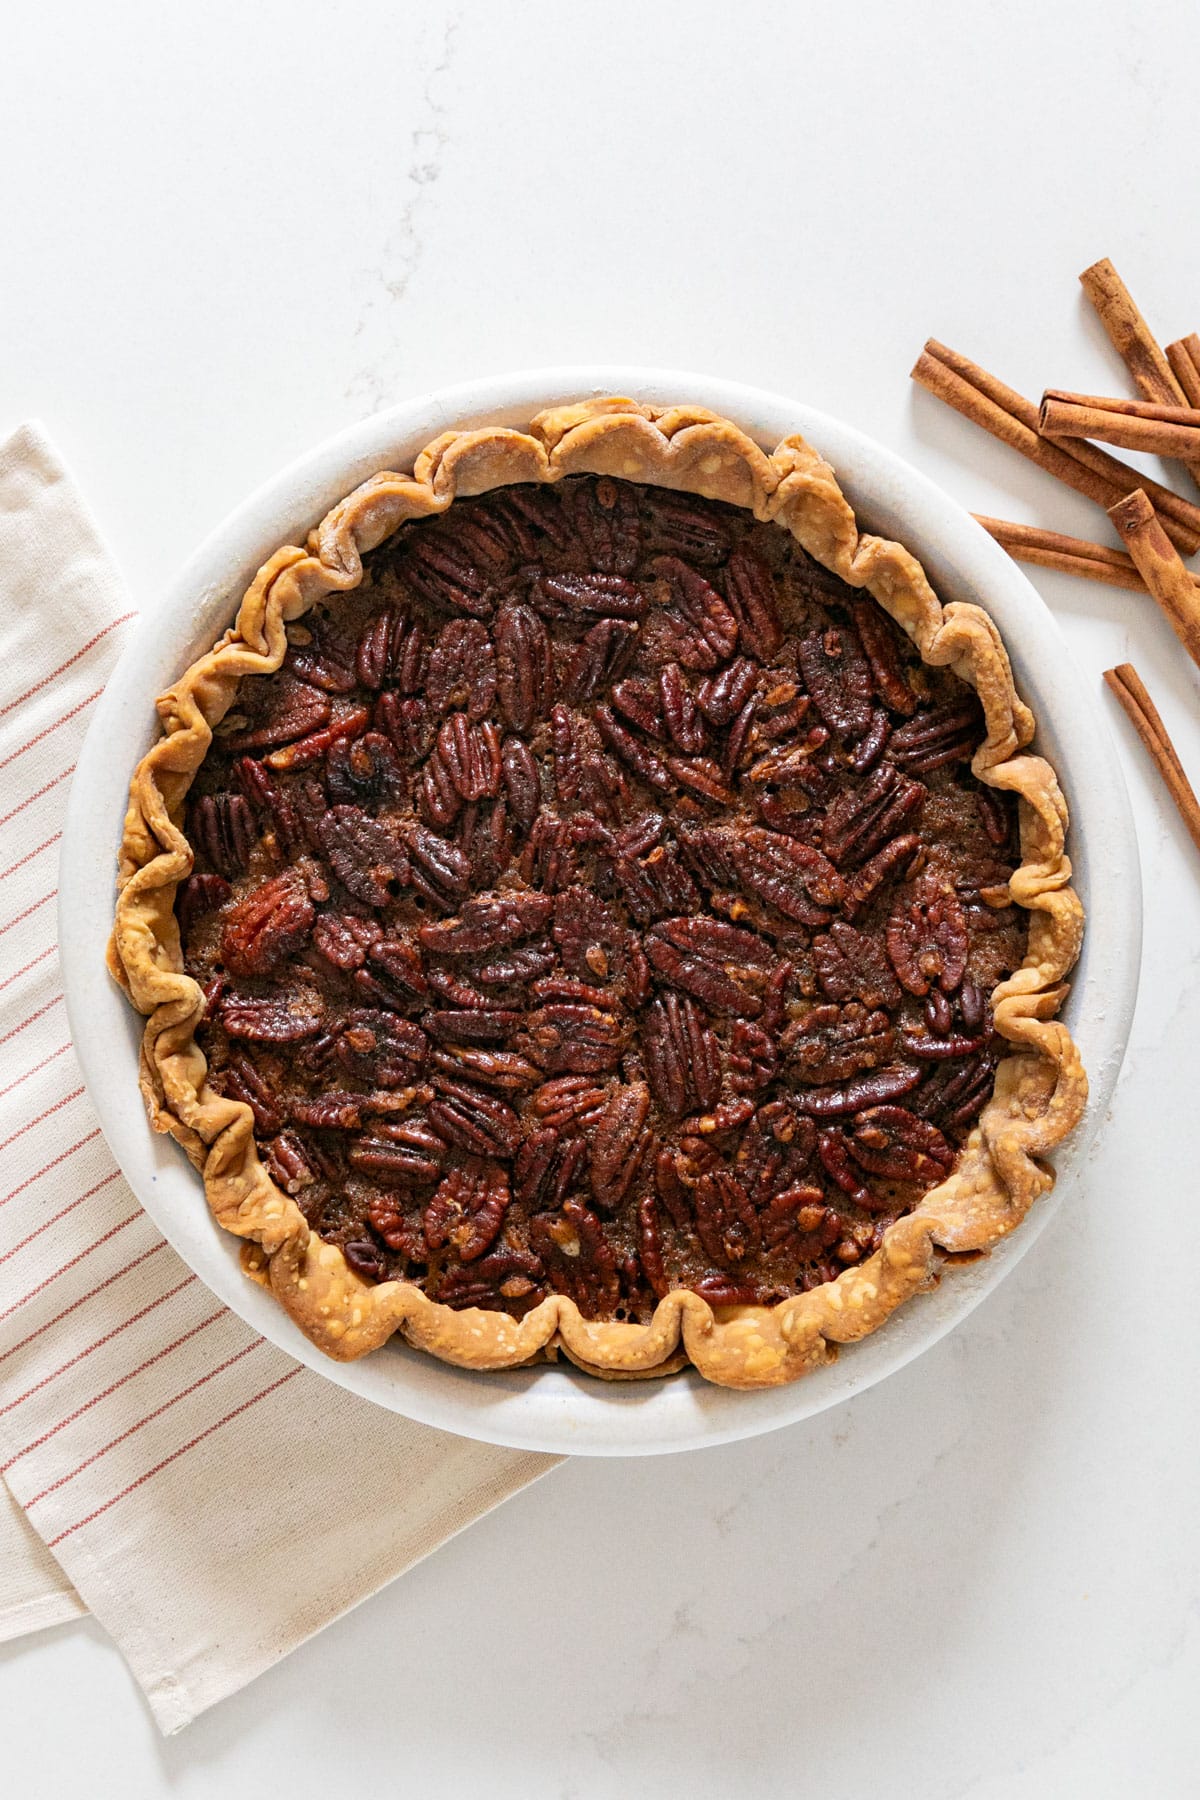 An overhead image of a pecan pie with a striped napkin and cinnamon sticks next to it.